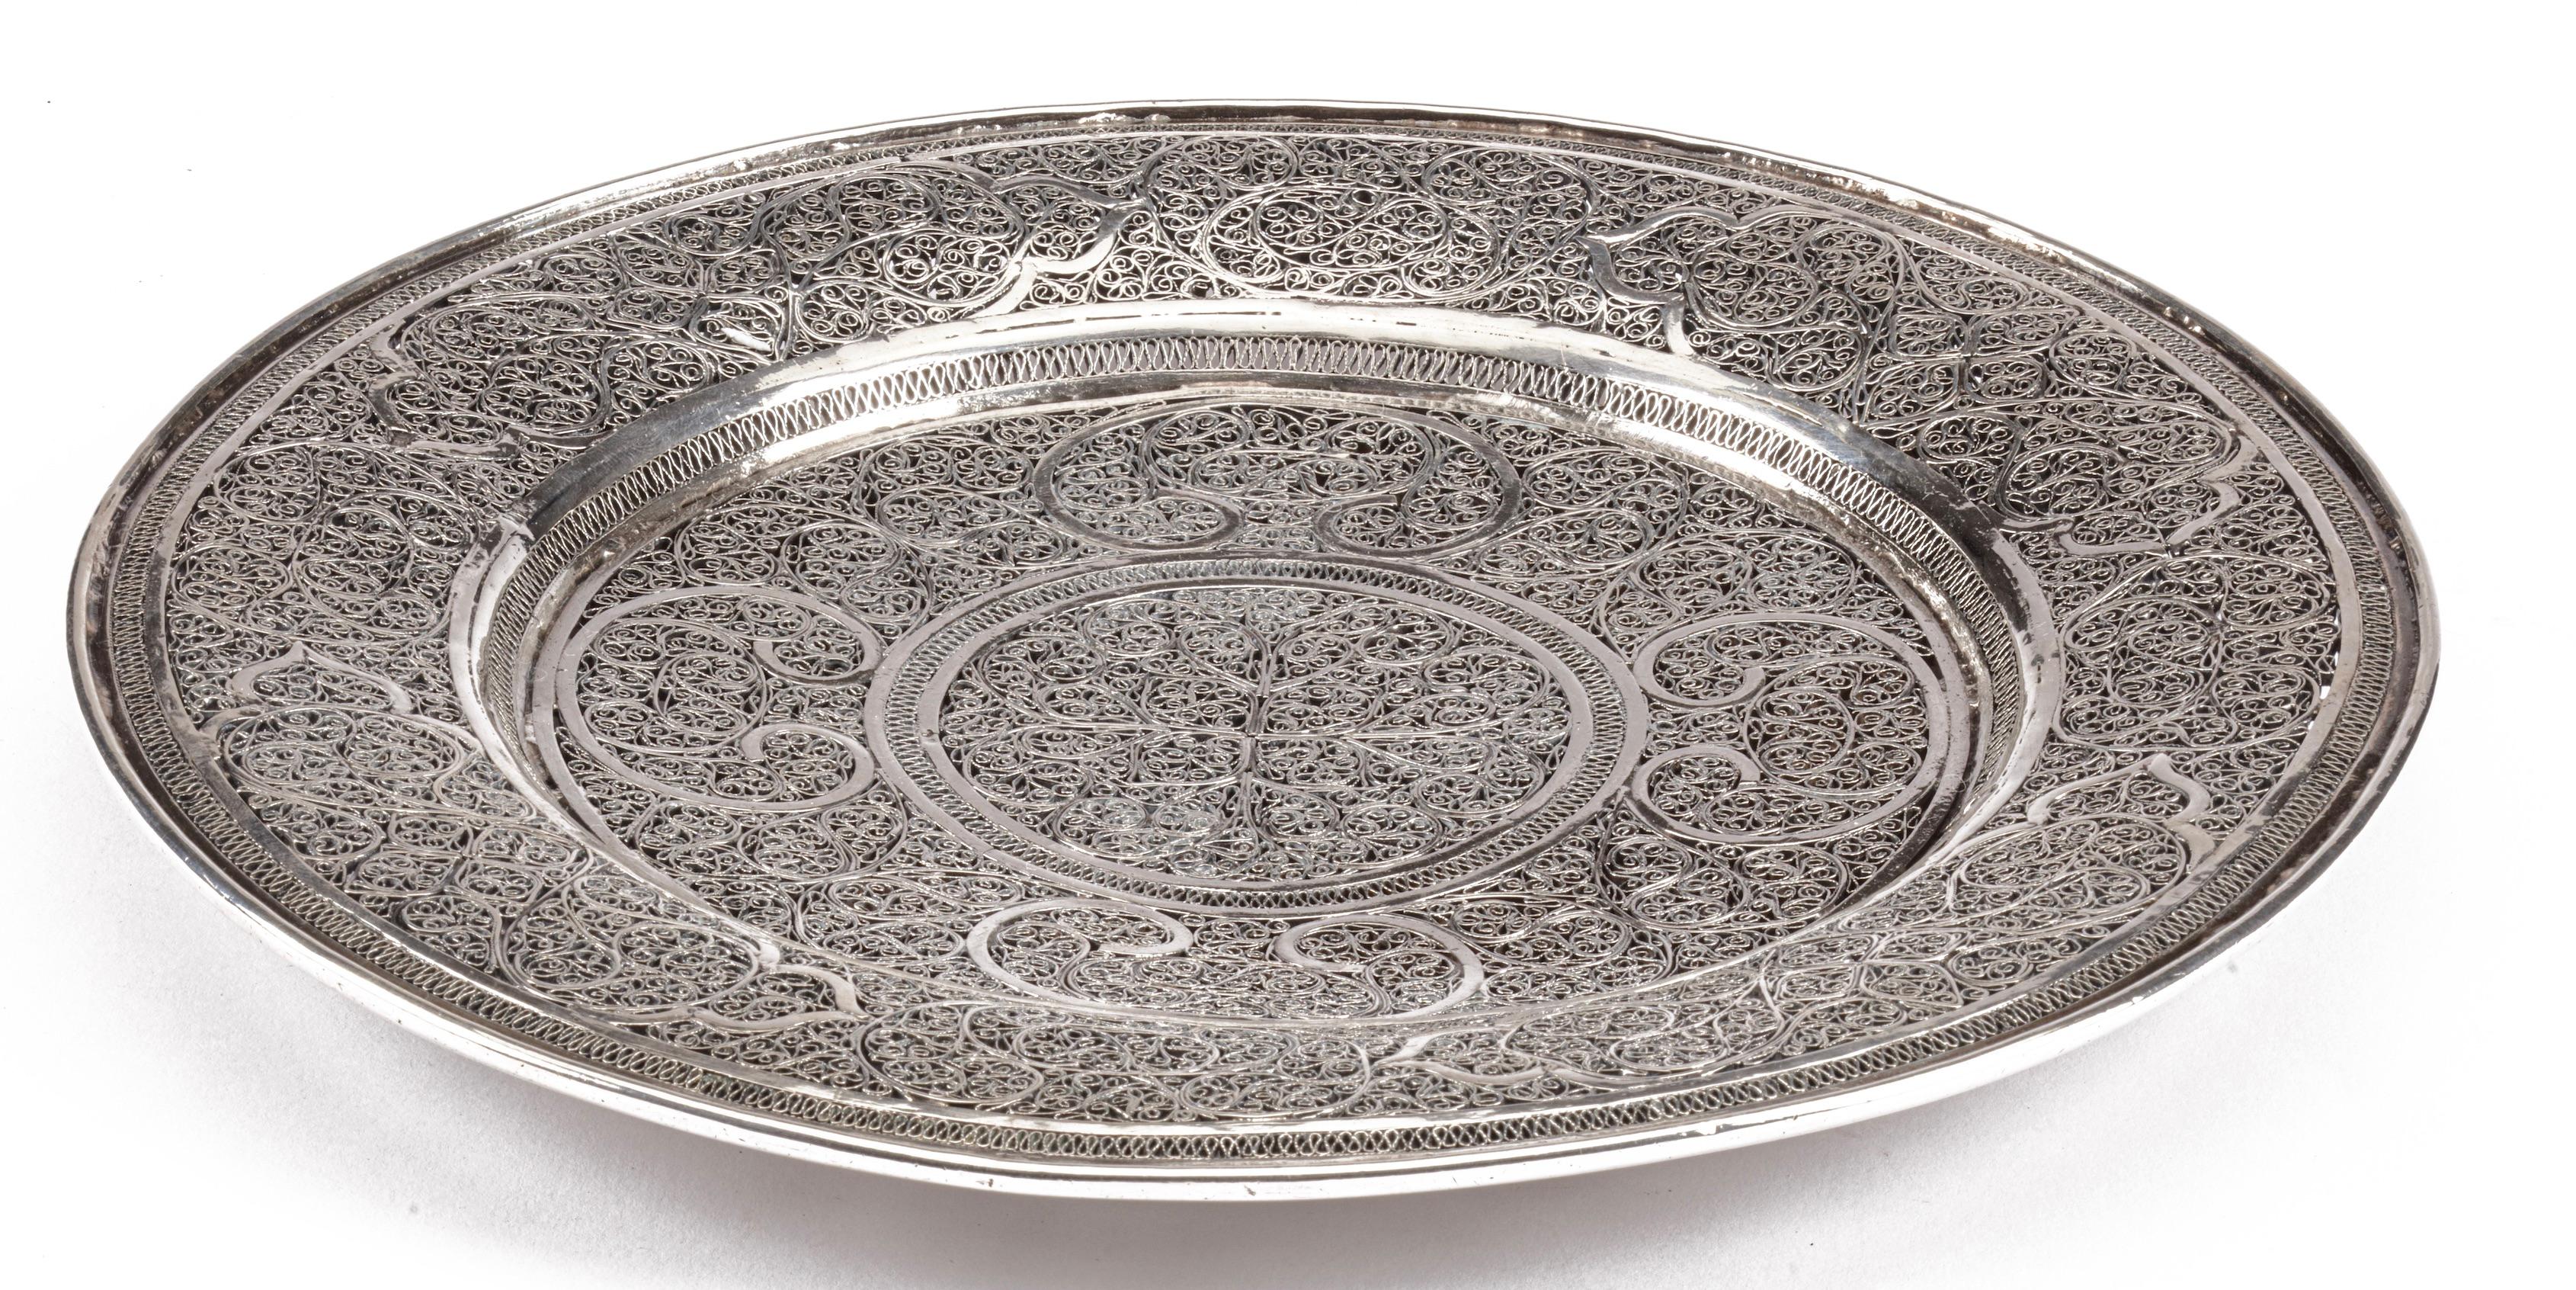 Splendid and Heavy Late 17th Century Dutch-Colonial Silver Filigree Salver For Sale 4